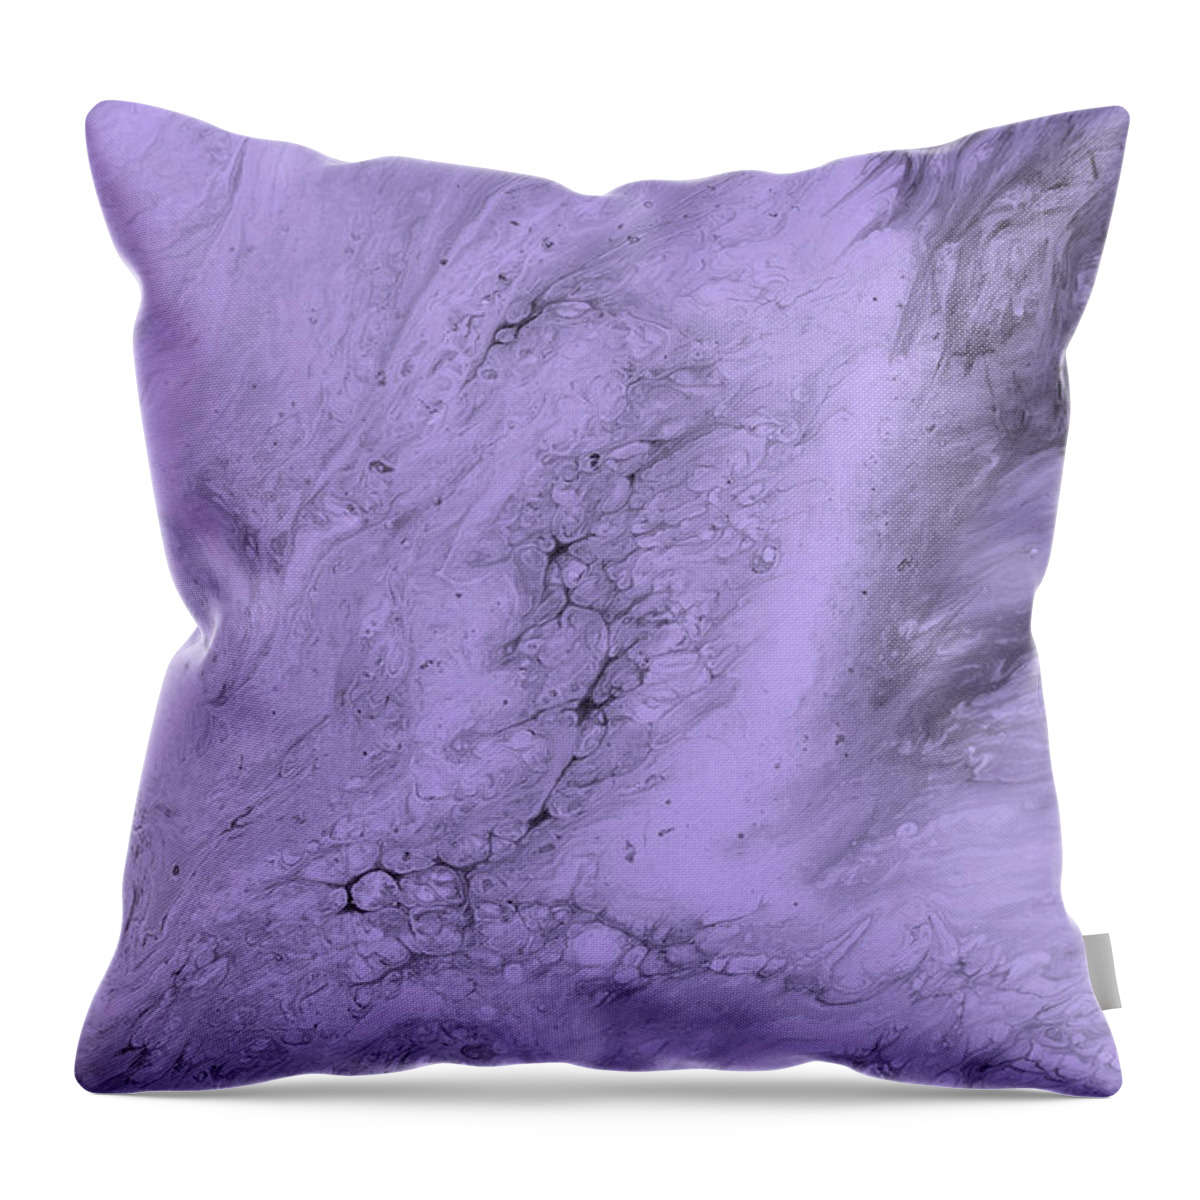 Lavender Throw Pillow featuring the painting Lavender Purple by Abstract Art